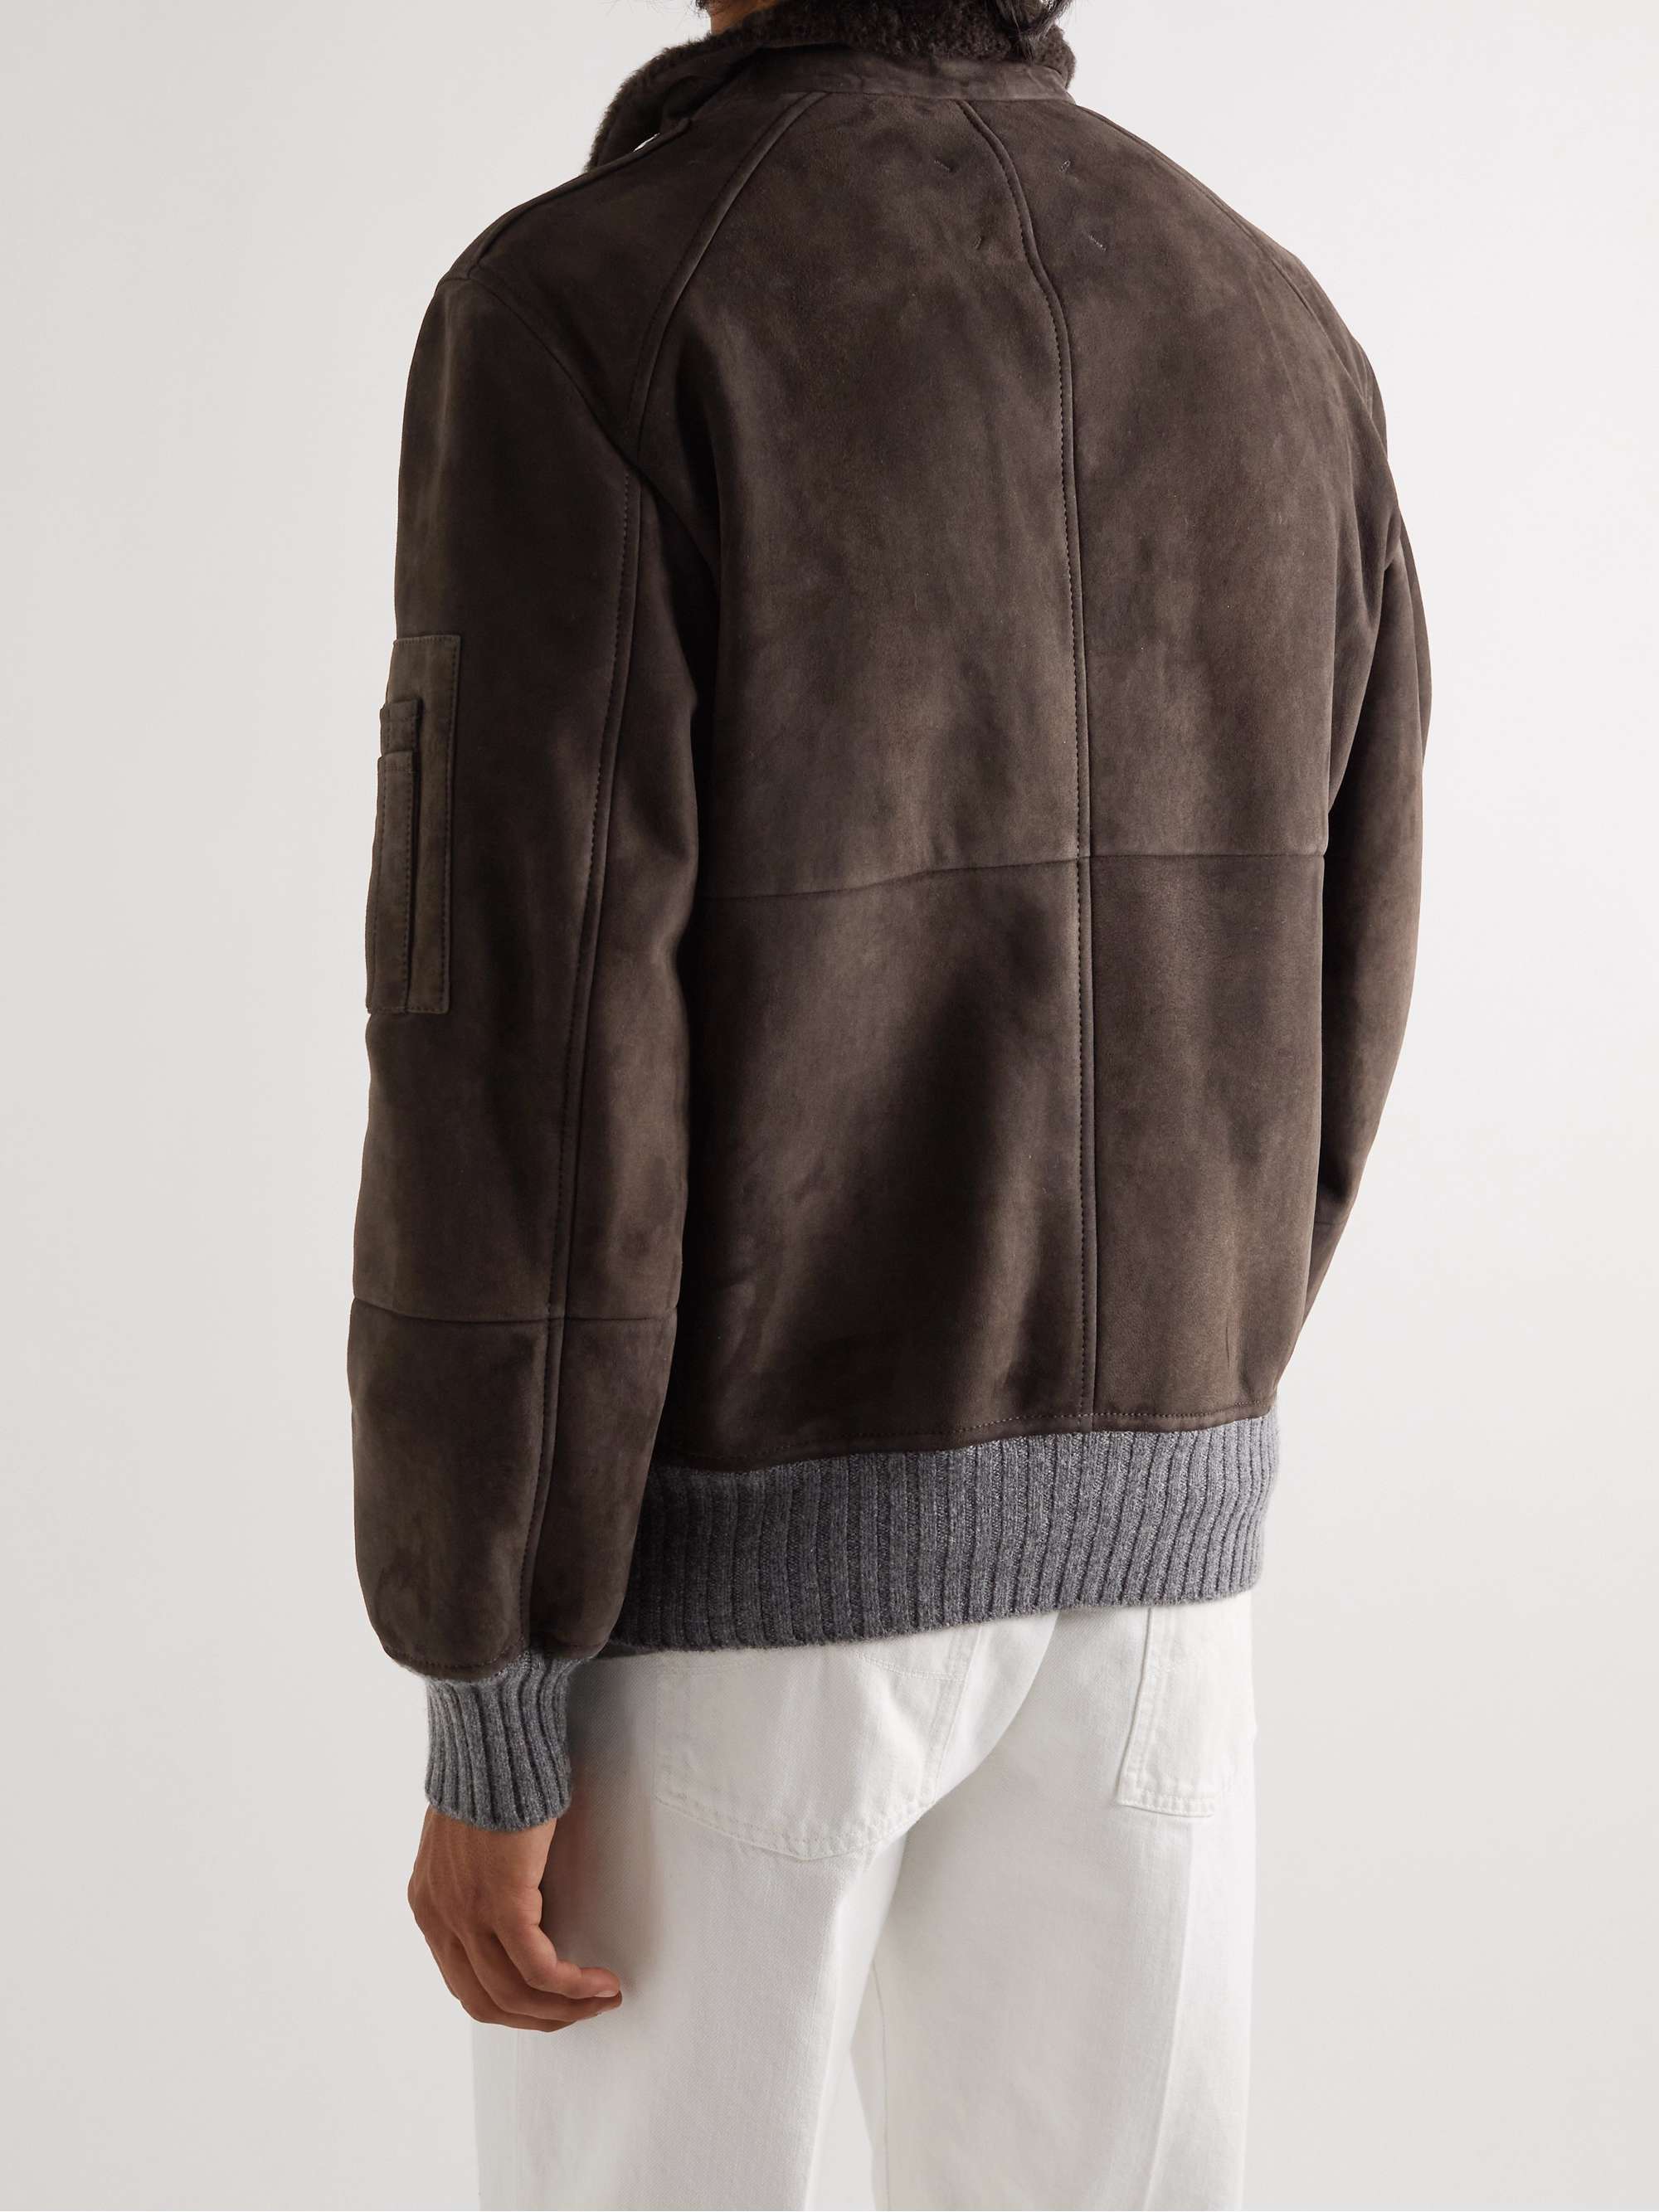 BRUNELLO CUCINELLI Shearling-Lined Cashmere-Trimmed Suede Bomber Jacket